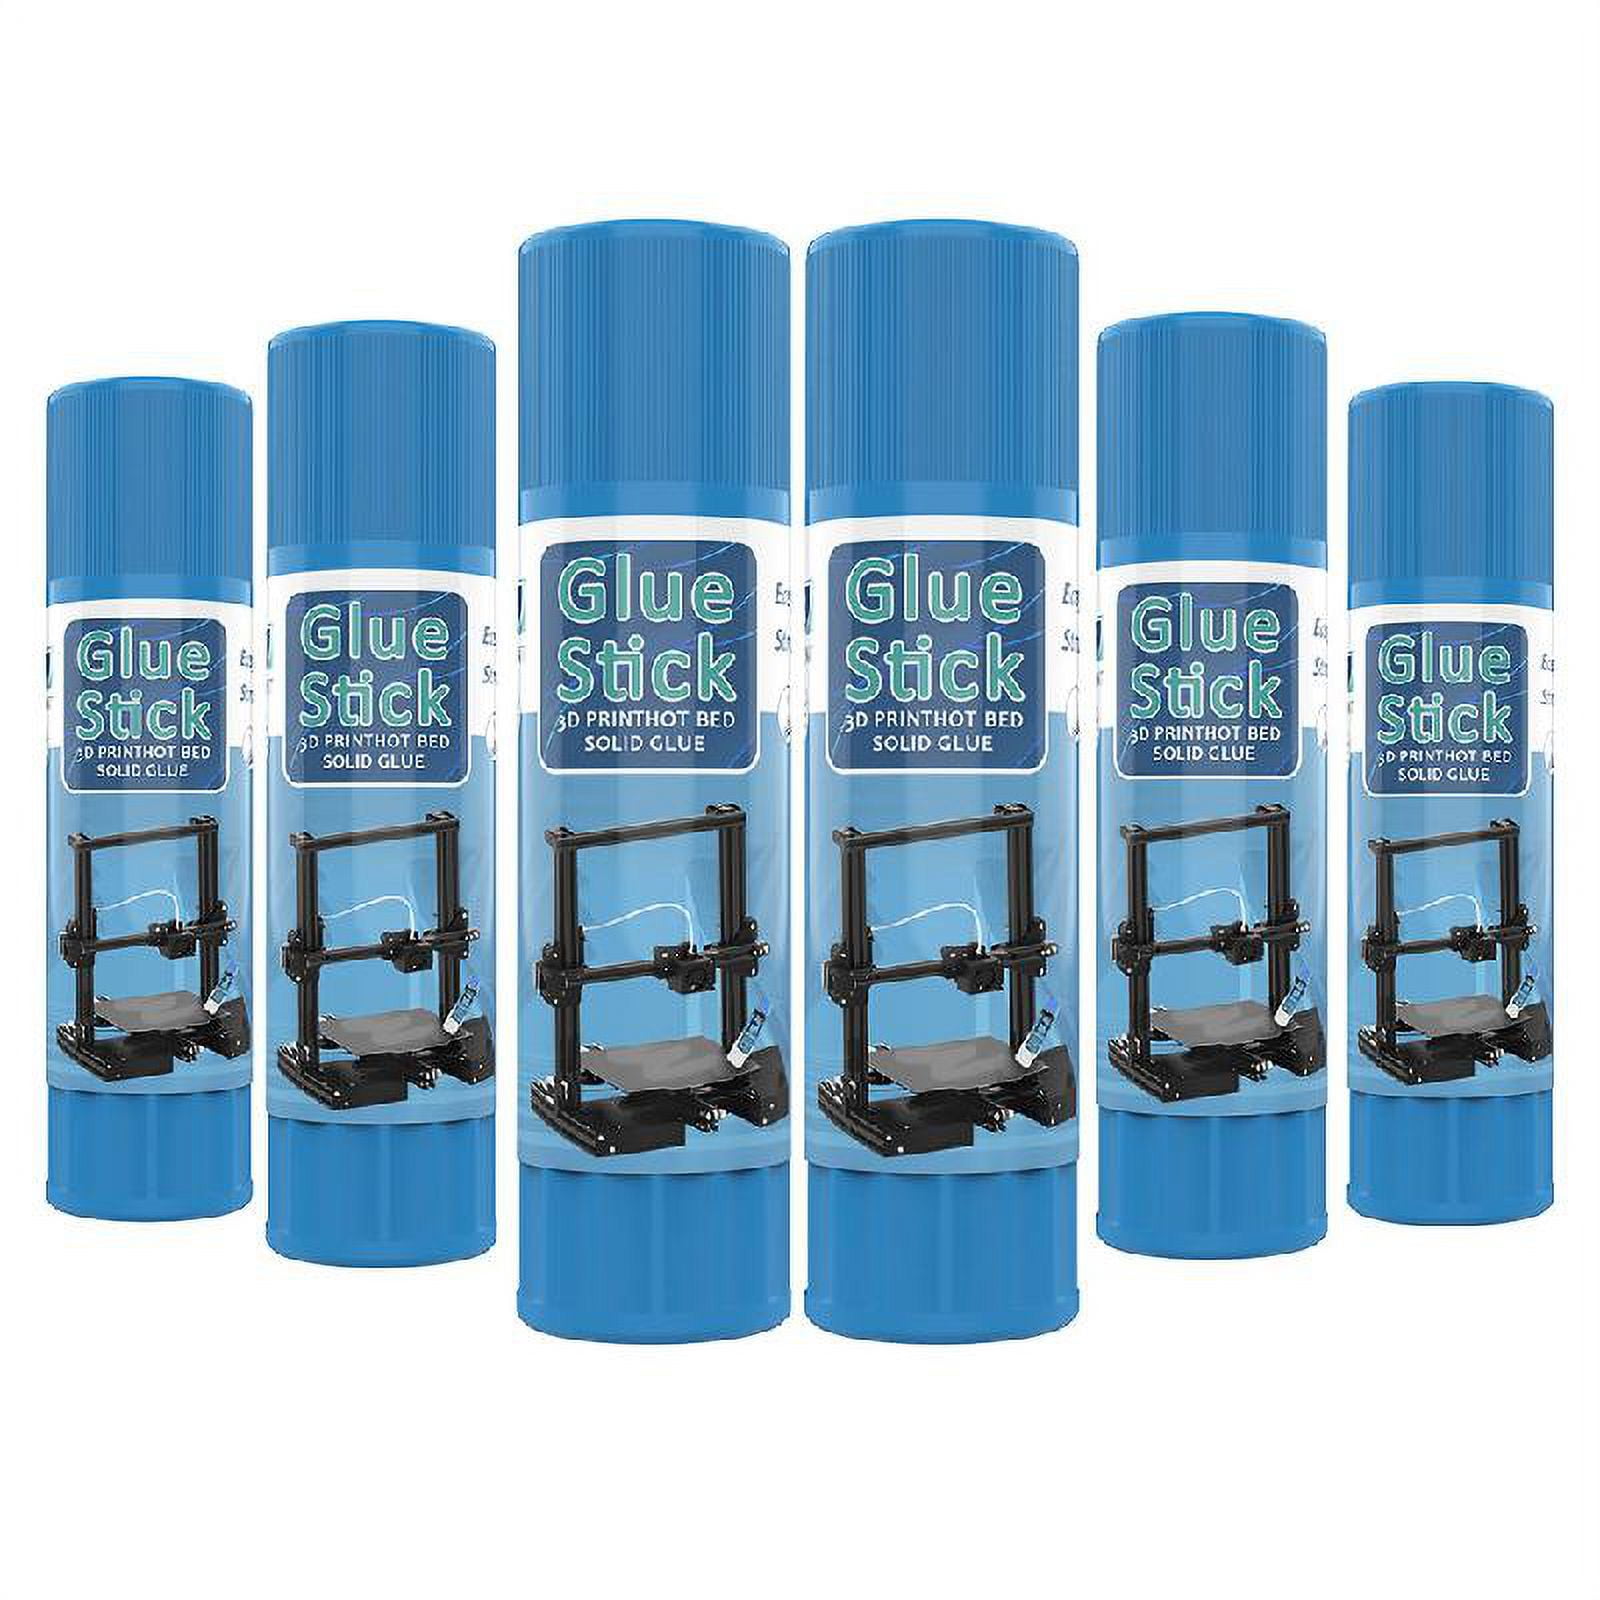  Geeetech 6 Pieces 3D Printer Glue Sticks 36 Gram Each PVP Solid  Glue Stick for 3D Printer Hot Bed, Water-Soluble Glue Stick, Quick Dry,  Easy to Stick and Washable : Industrial